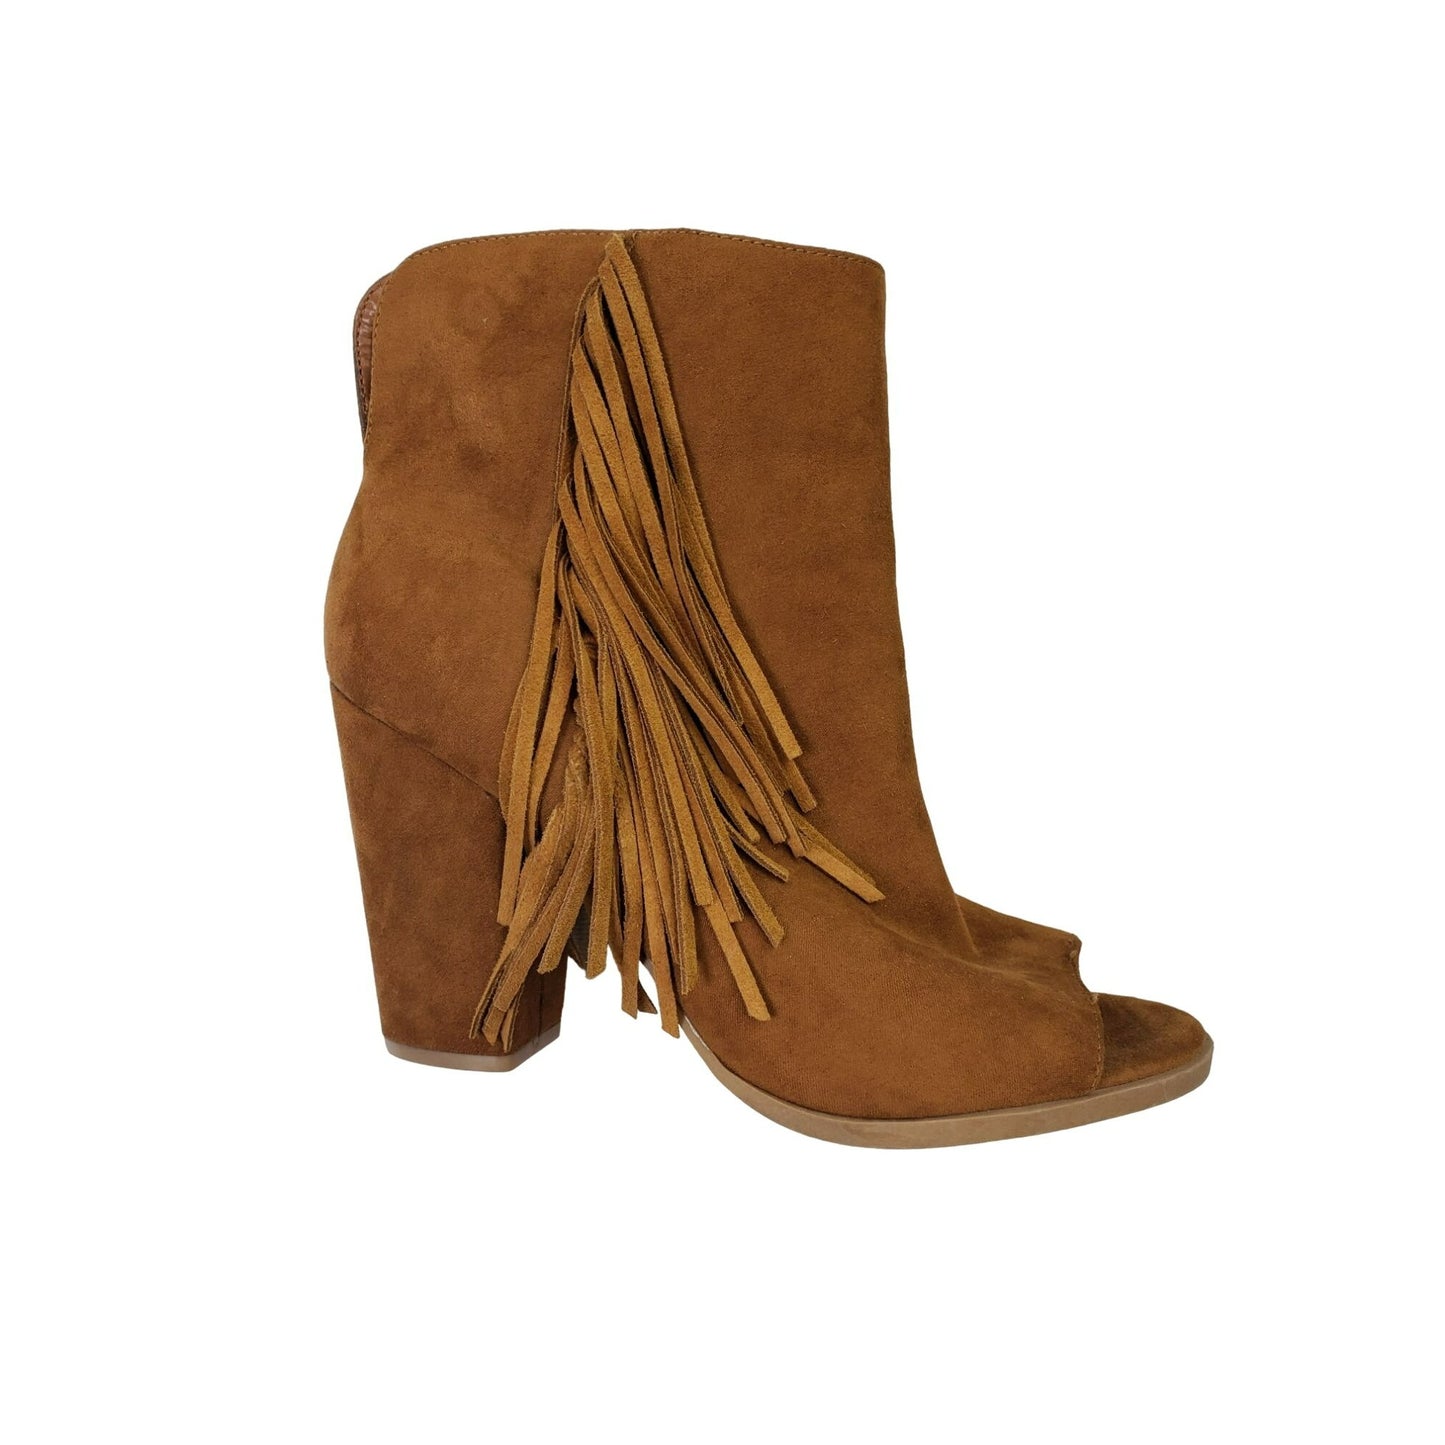 DV by Dolce Vita Suede Leather Fringe Open Toe Booties Size 9.5